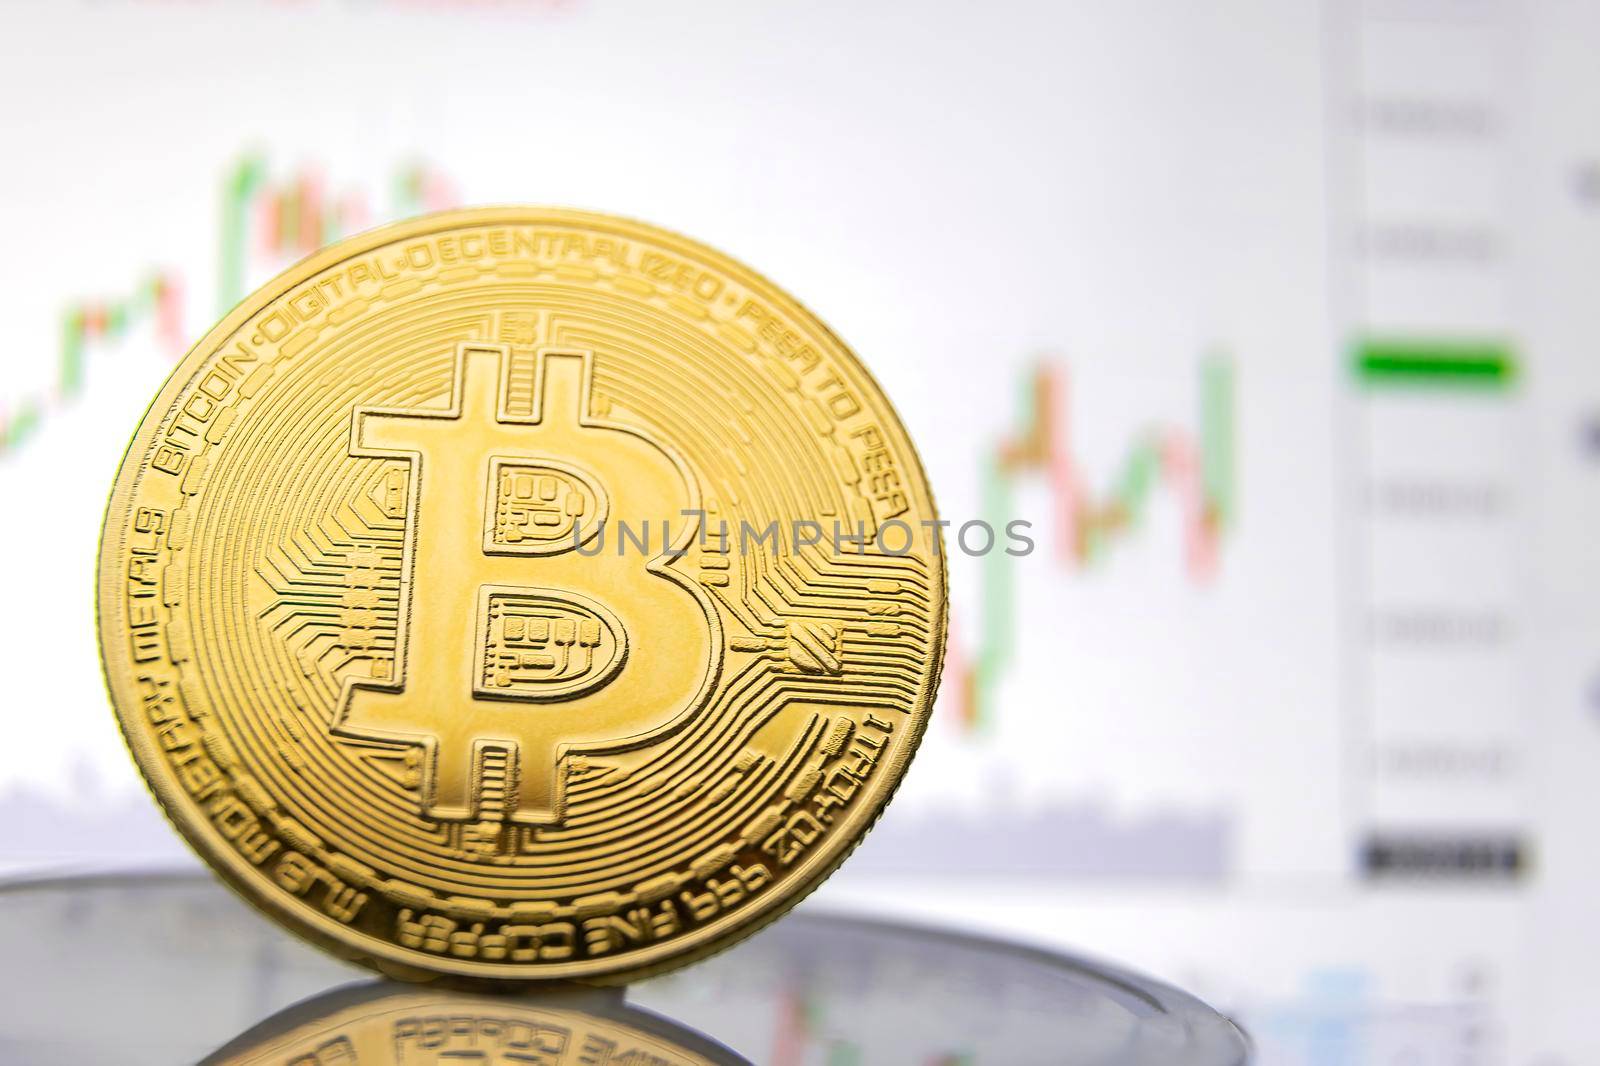 bitcoin coin on the background of the graph close-up